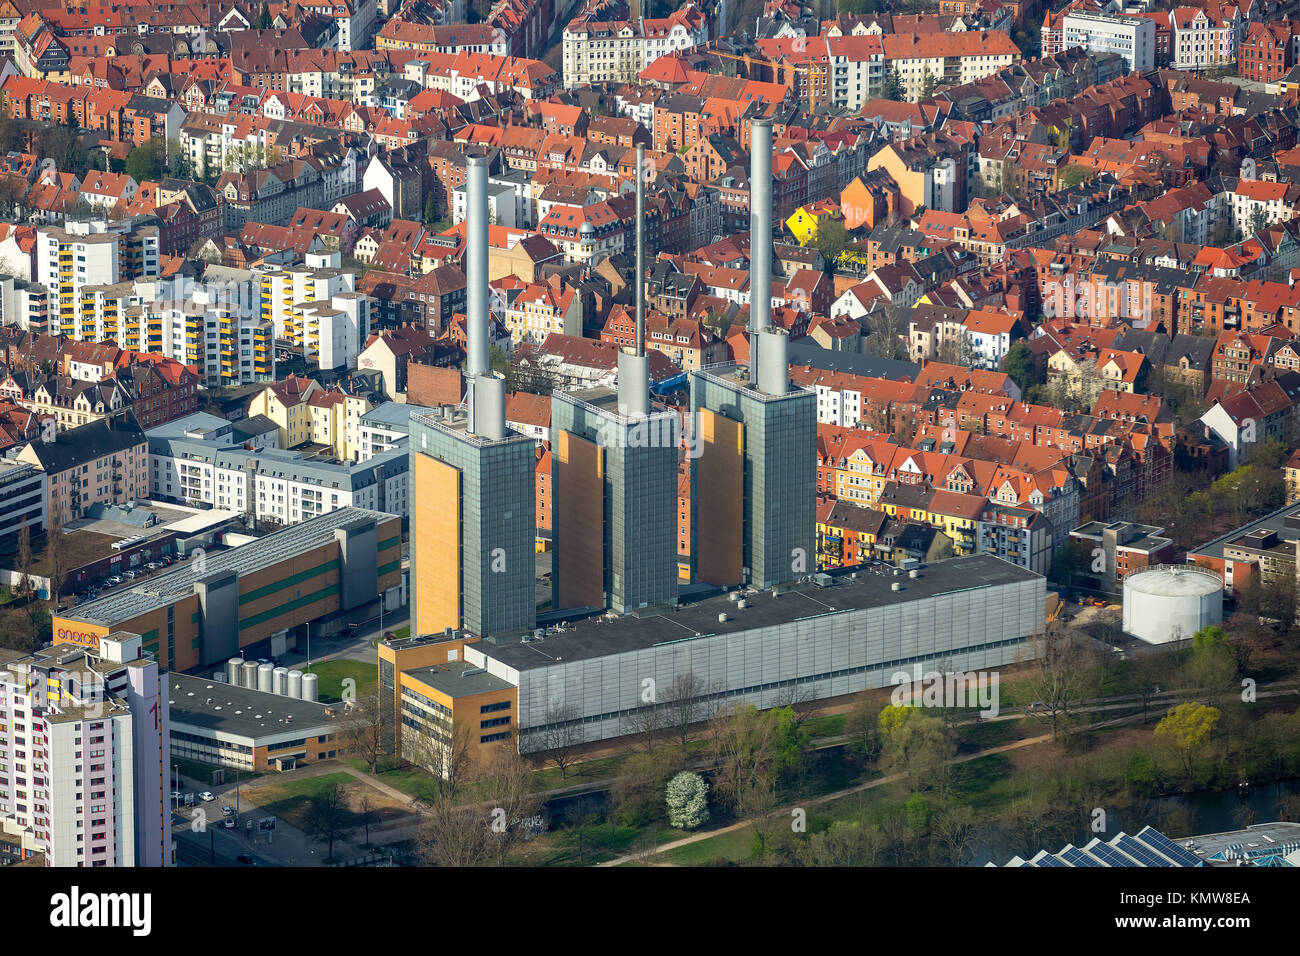 Cogeneration plant Linden, the three warm brothers, natural gas power plant  Hanover, chimneys, Hanover, state capital, Lower Saxony, Germany, Hannover  Stock Photo - Alamy